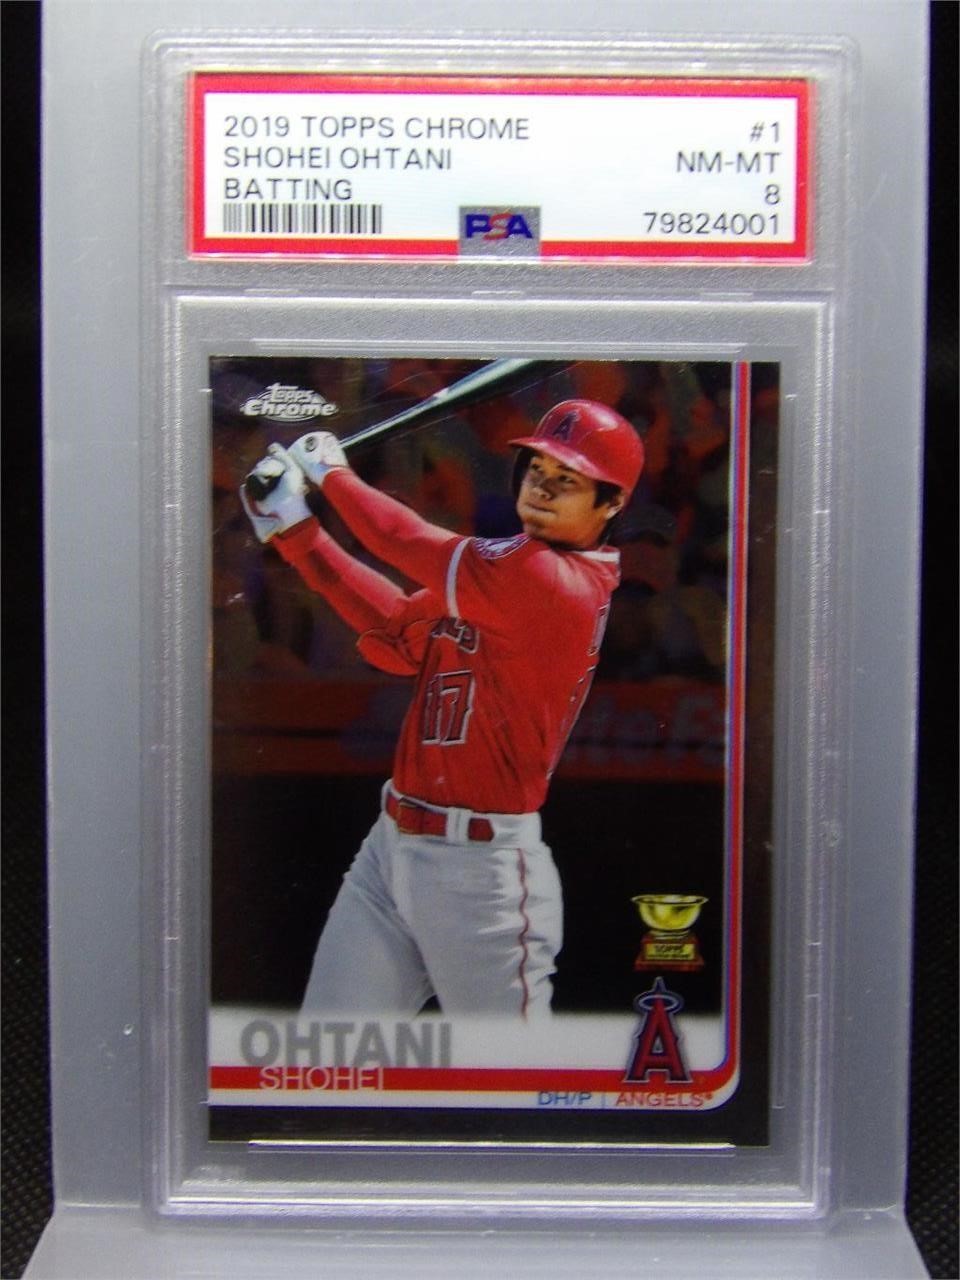 Modern (mostly) Sports Card Auction - April 28 7:00 PM Cent